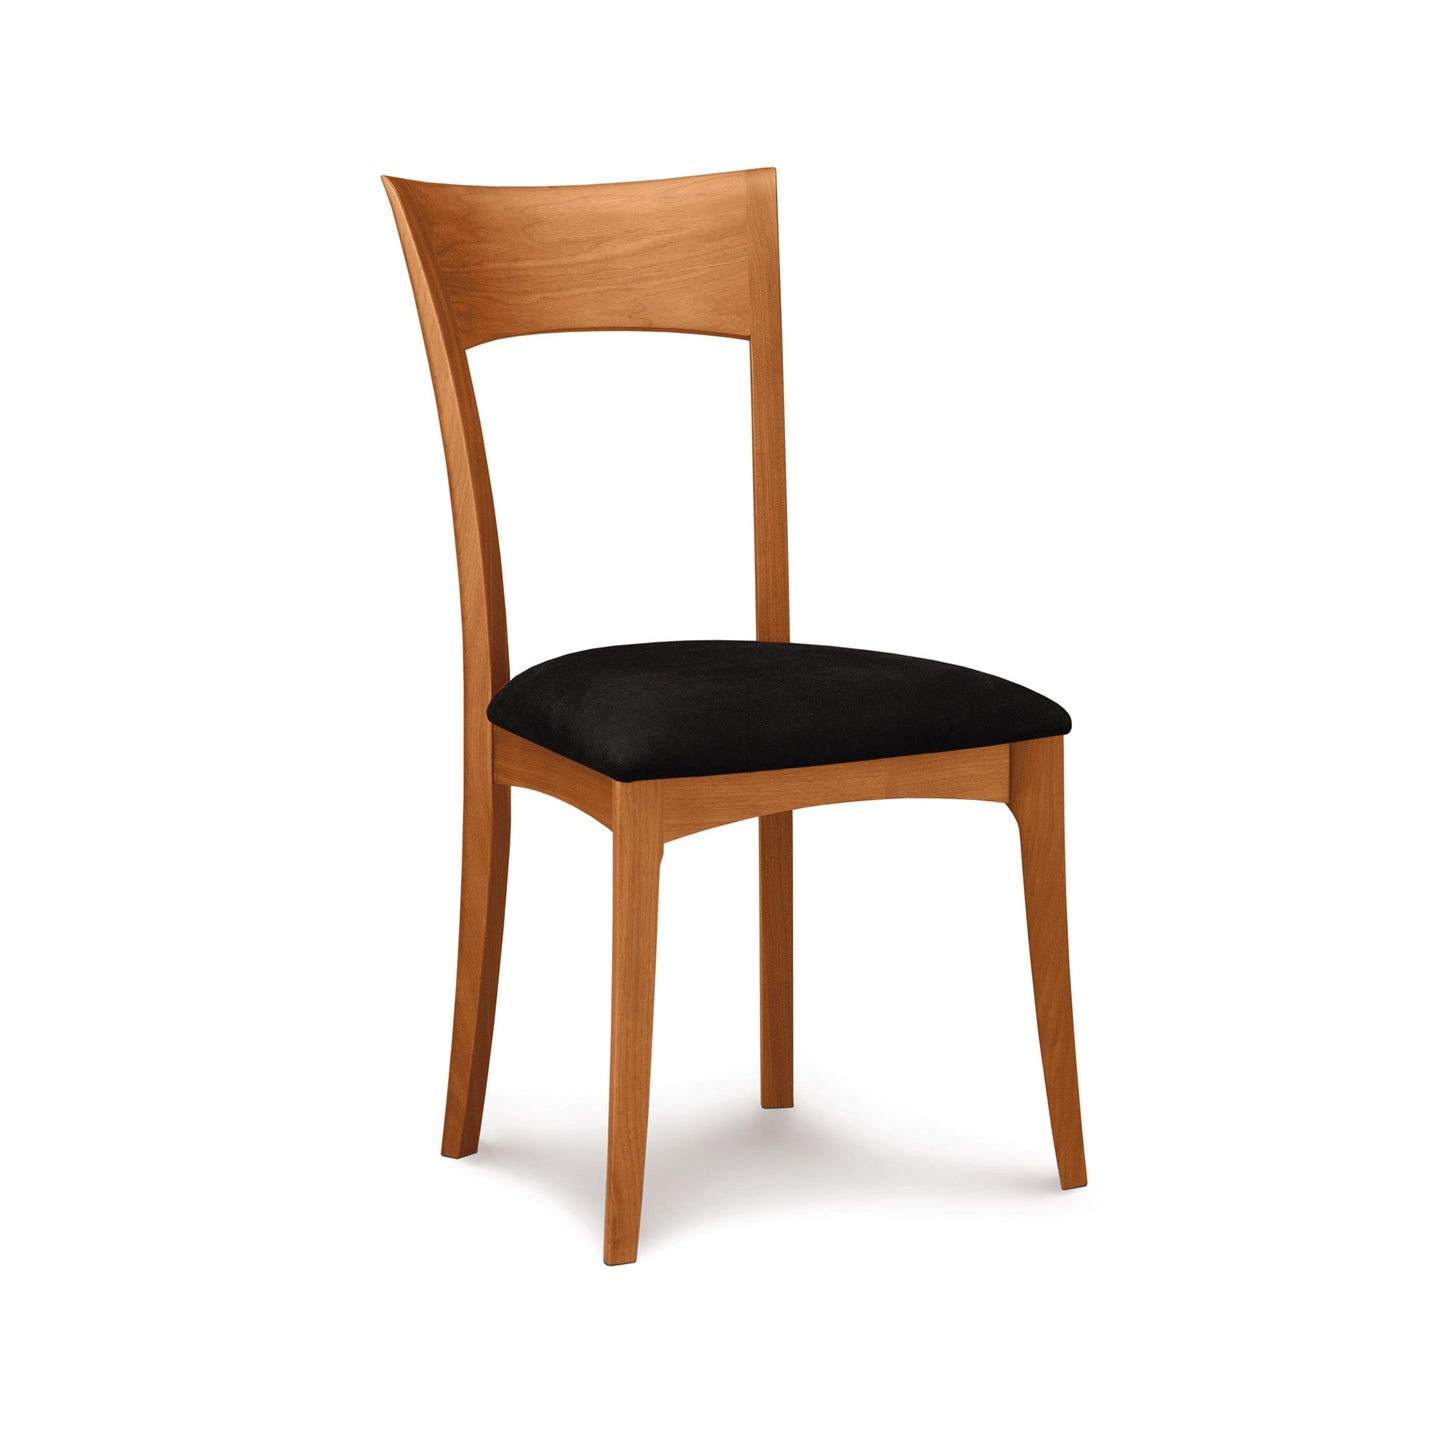 An Ingrid Chair - Priority Ship from Copeland Furniture, a Shaker style wooden chair with a black cushion.